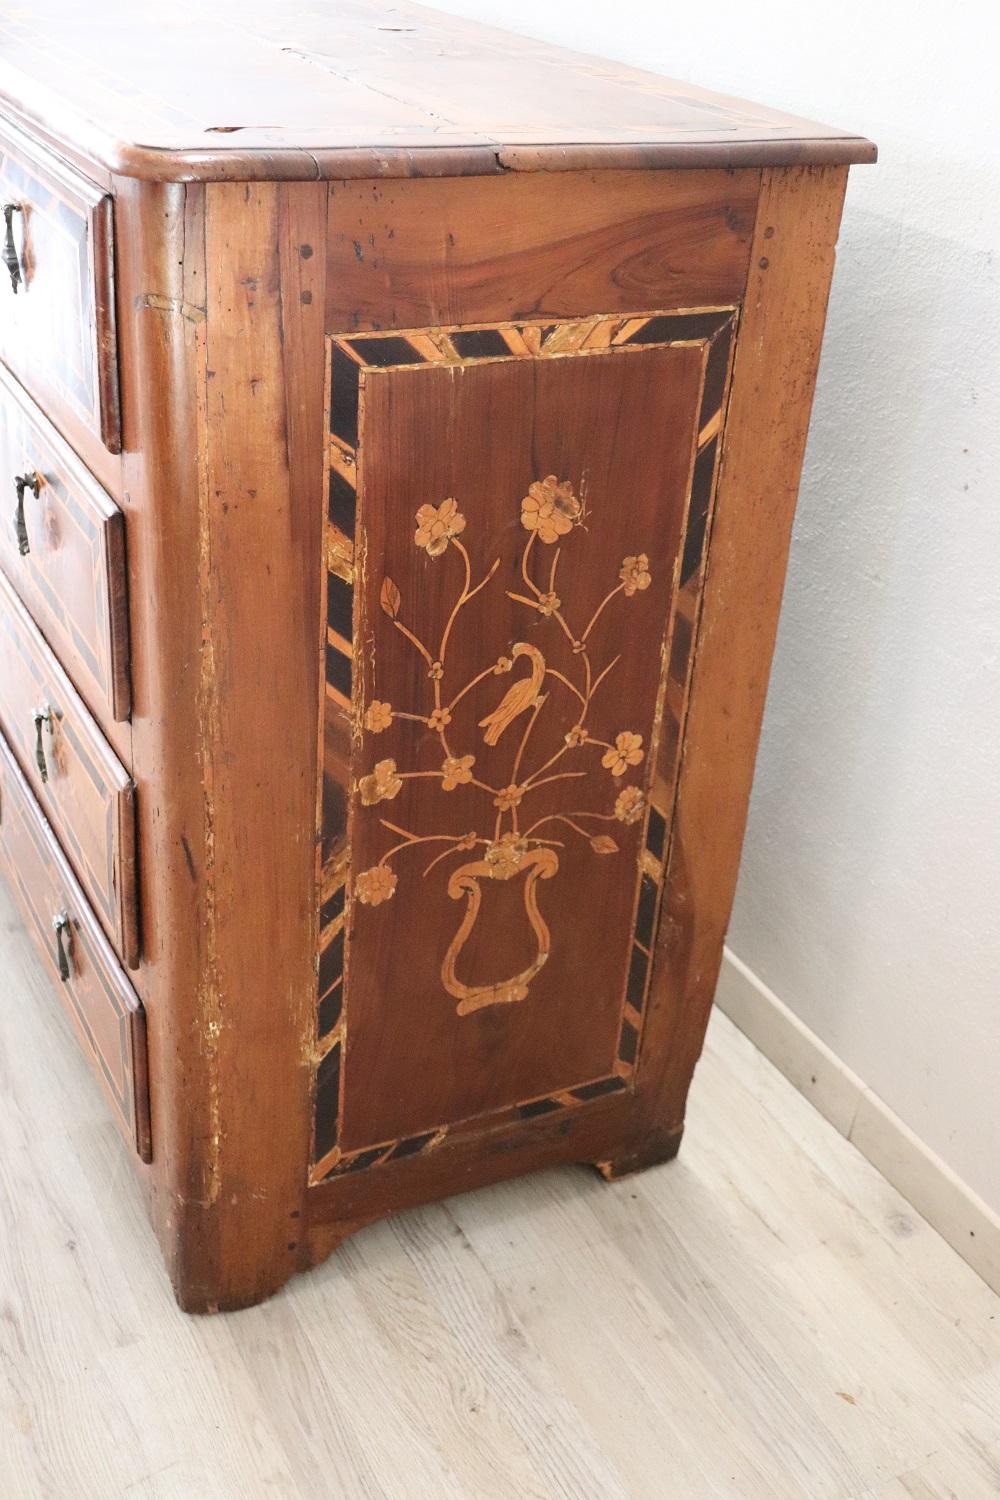 Late 17th Century 17th Century Italian Louis XIV Walnut Inlaid Antique Commode or Chest of Drawers For Sale